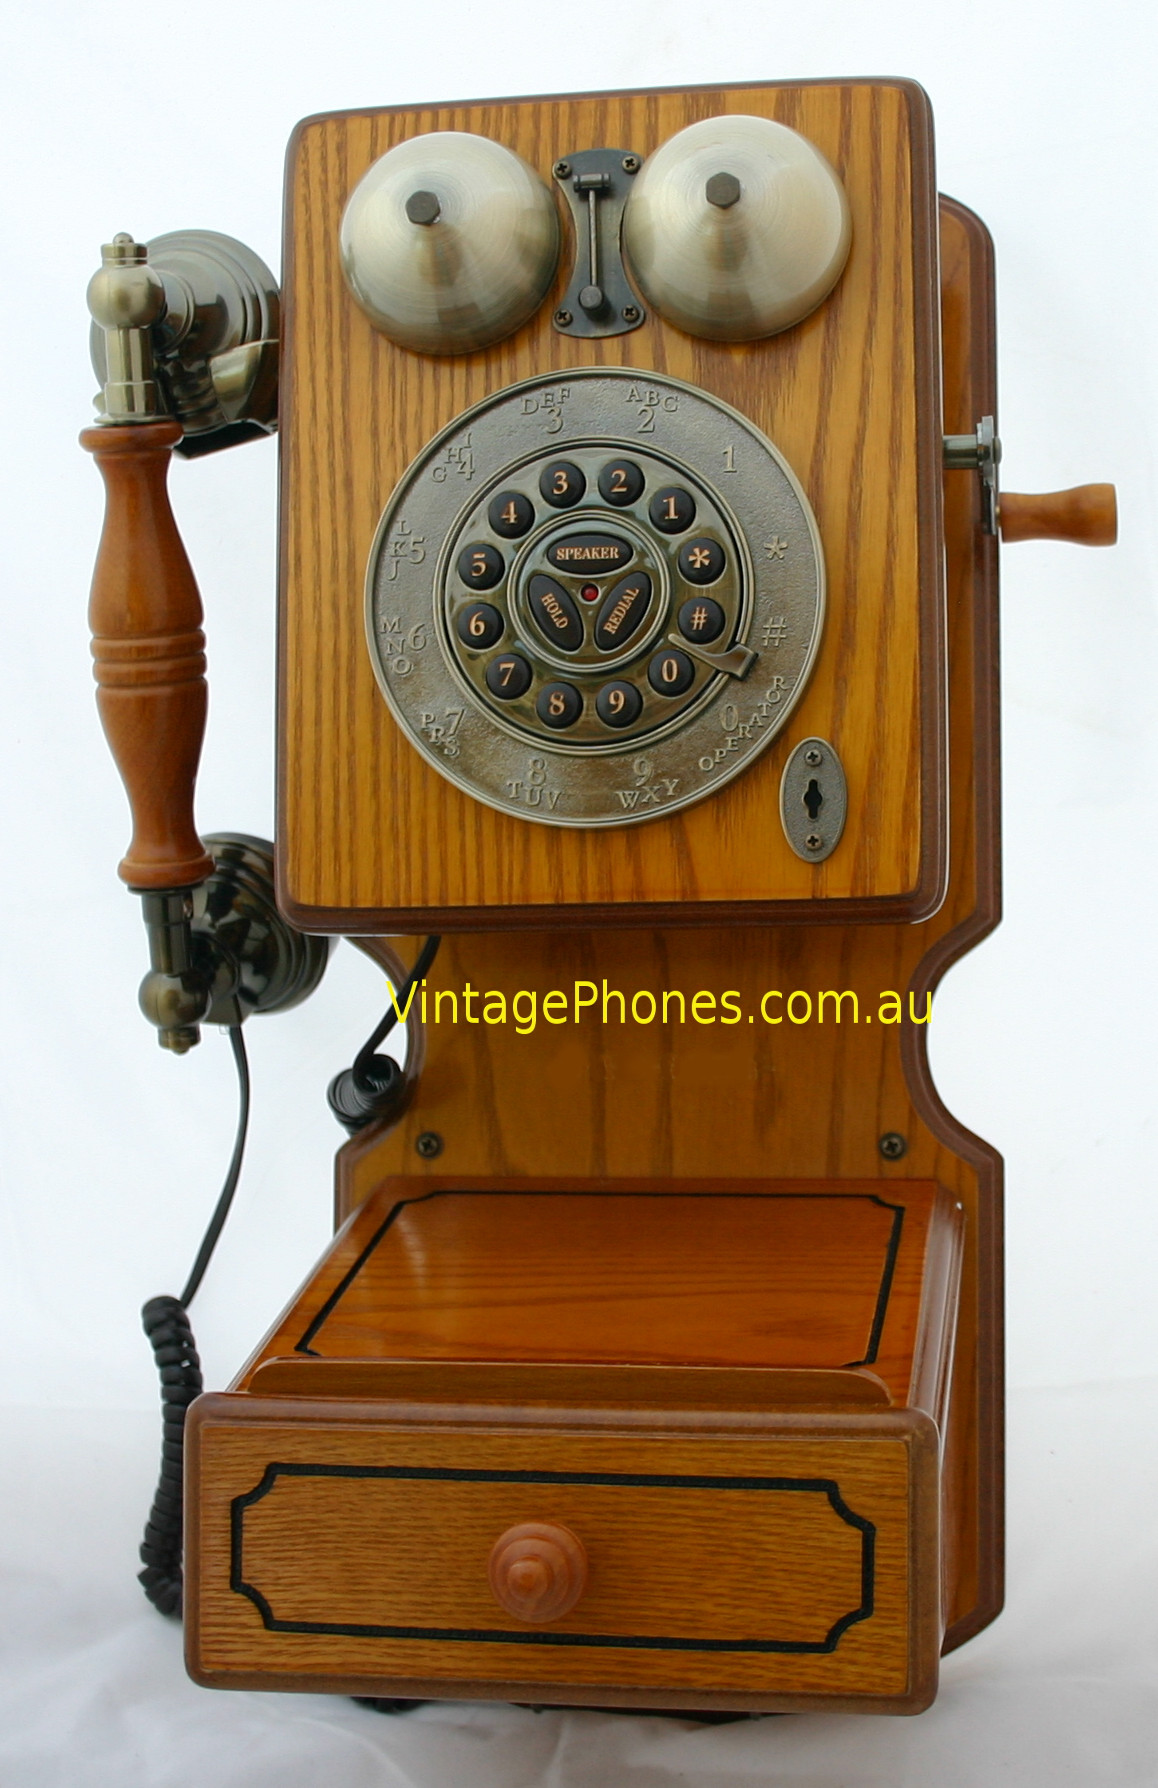 Kitchen Wall Phone
 New reproduction Wooden Vintage Retro Rotary Dial Wallphone